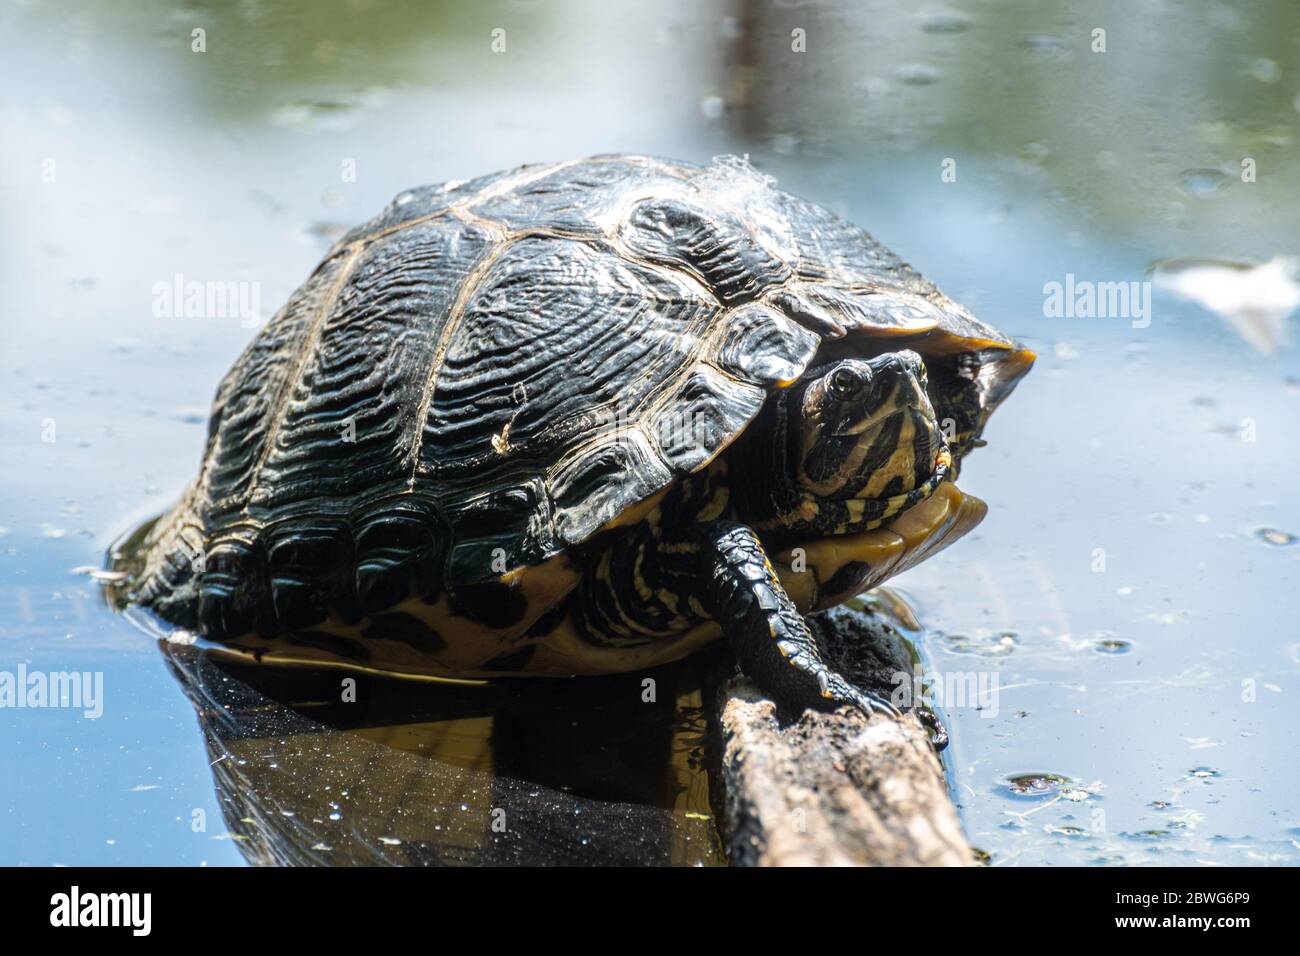 Yellow-bellied slider (Trachyemys scripta scripta), a non-native turtle (terrapin) species of reptile in the Basingstoke Canal, UK. Abandoned pet. Stock Photo